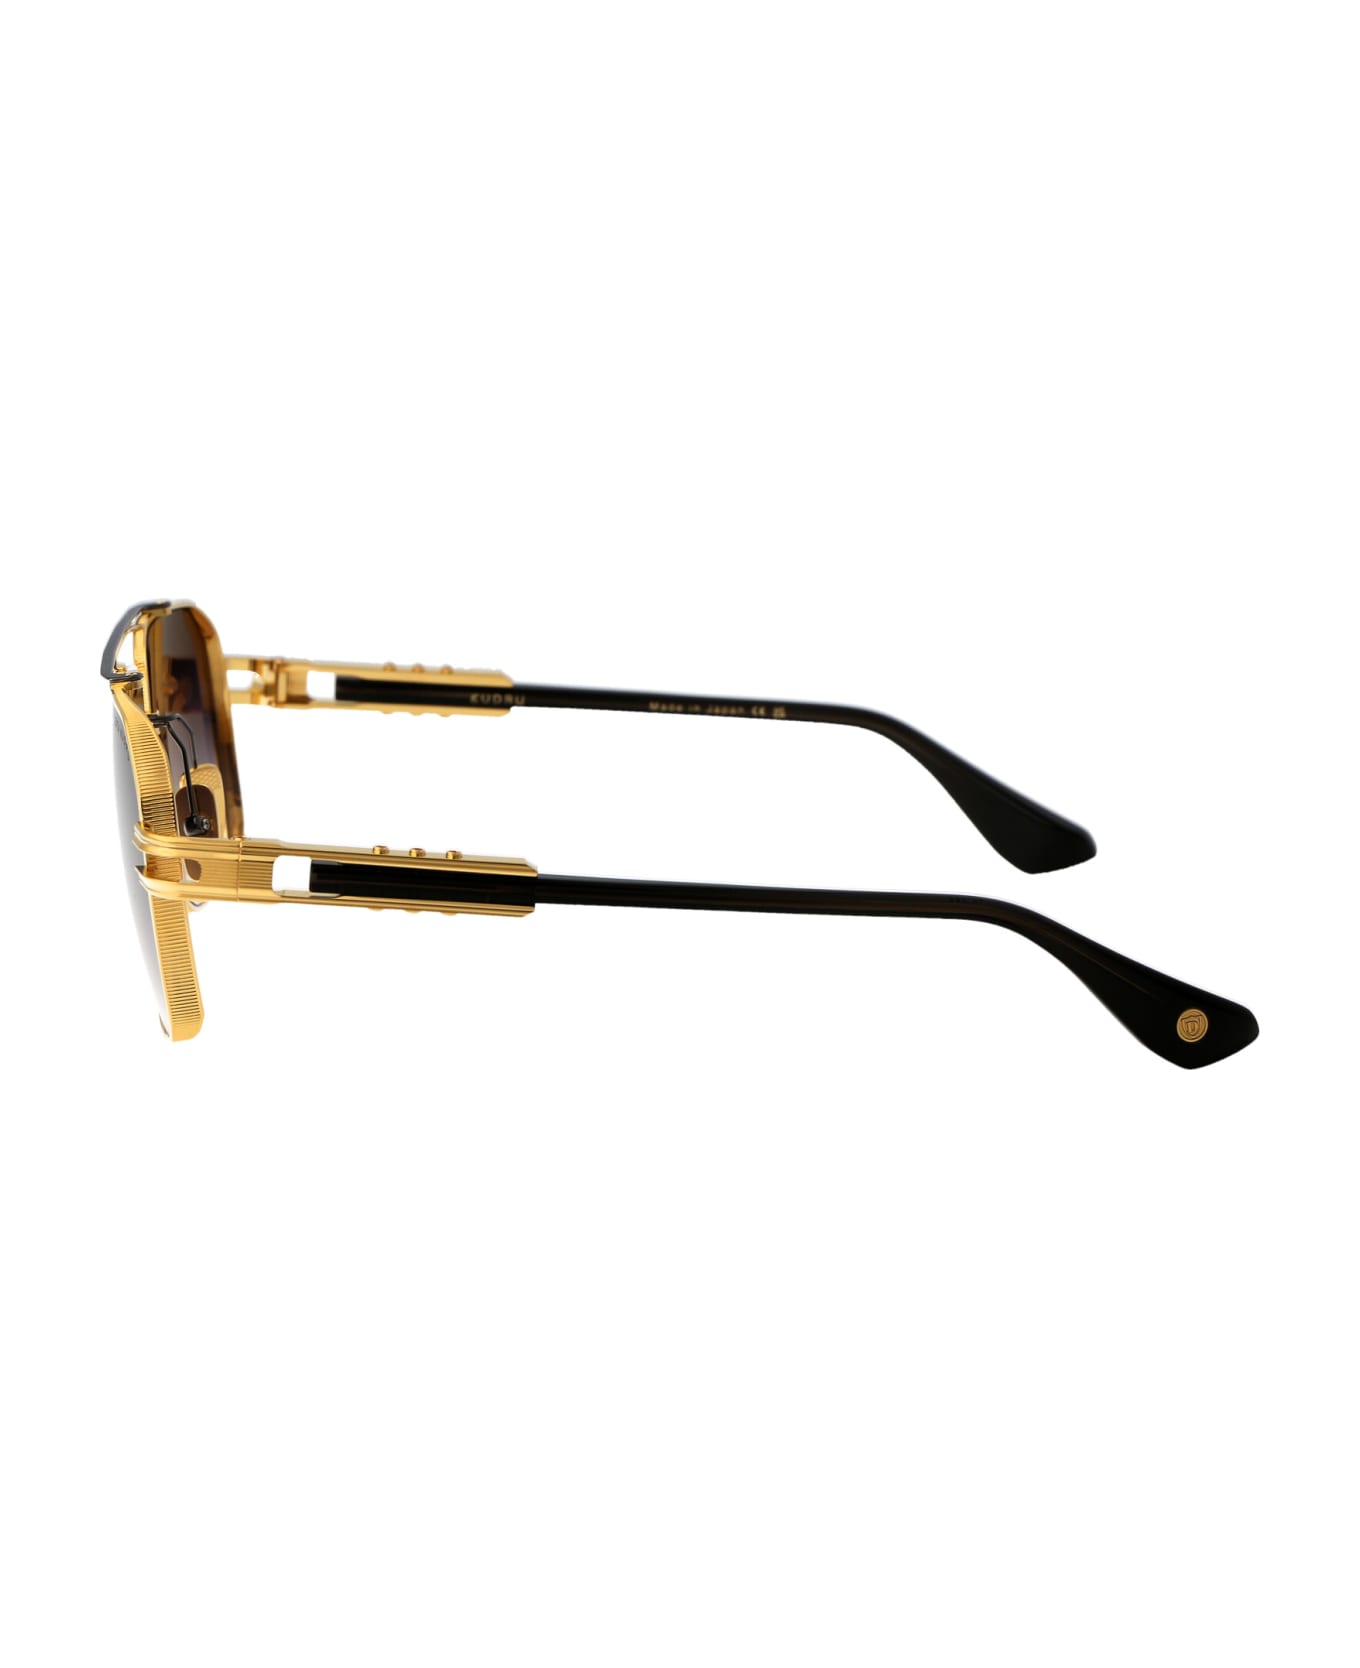 Dita Kudru Sunglasses - 01 YELLOW GOLD - ANTIQUE SILVER W/ GREY TO CLEAR GRADIENT